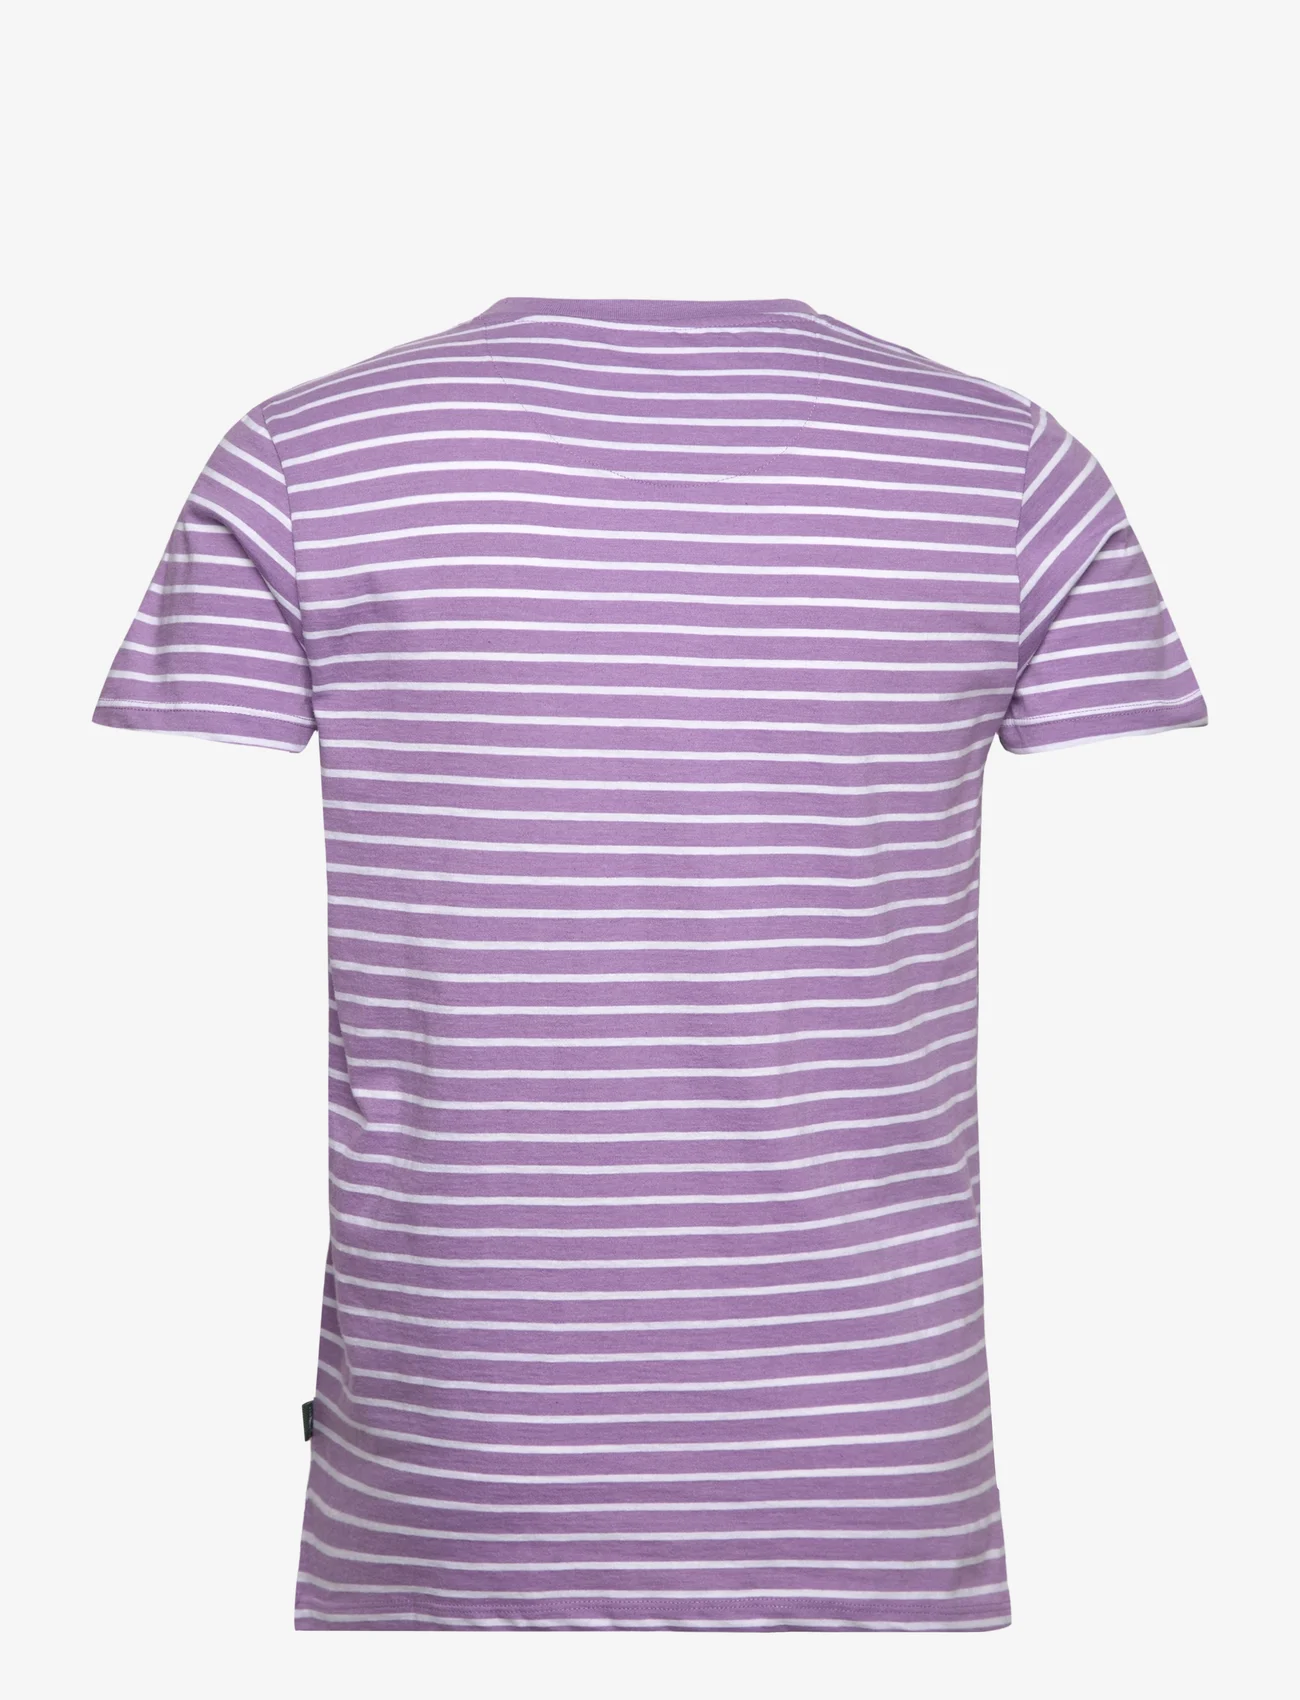 Kronstadt - Timmi Organic/Recycled striped t-shirt - lavender / white - 1